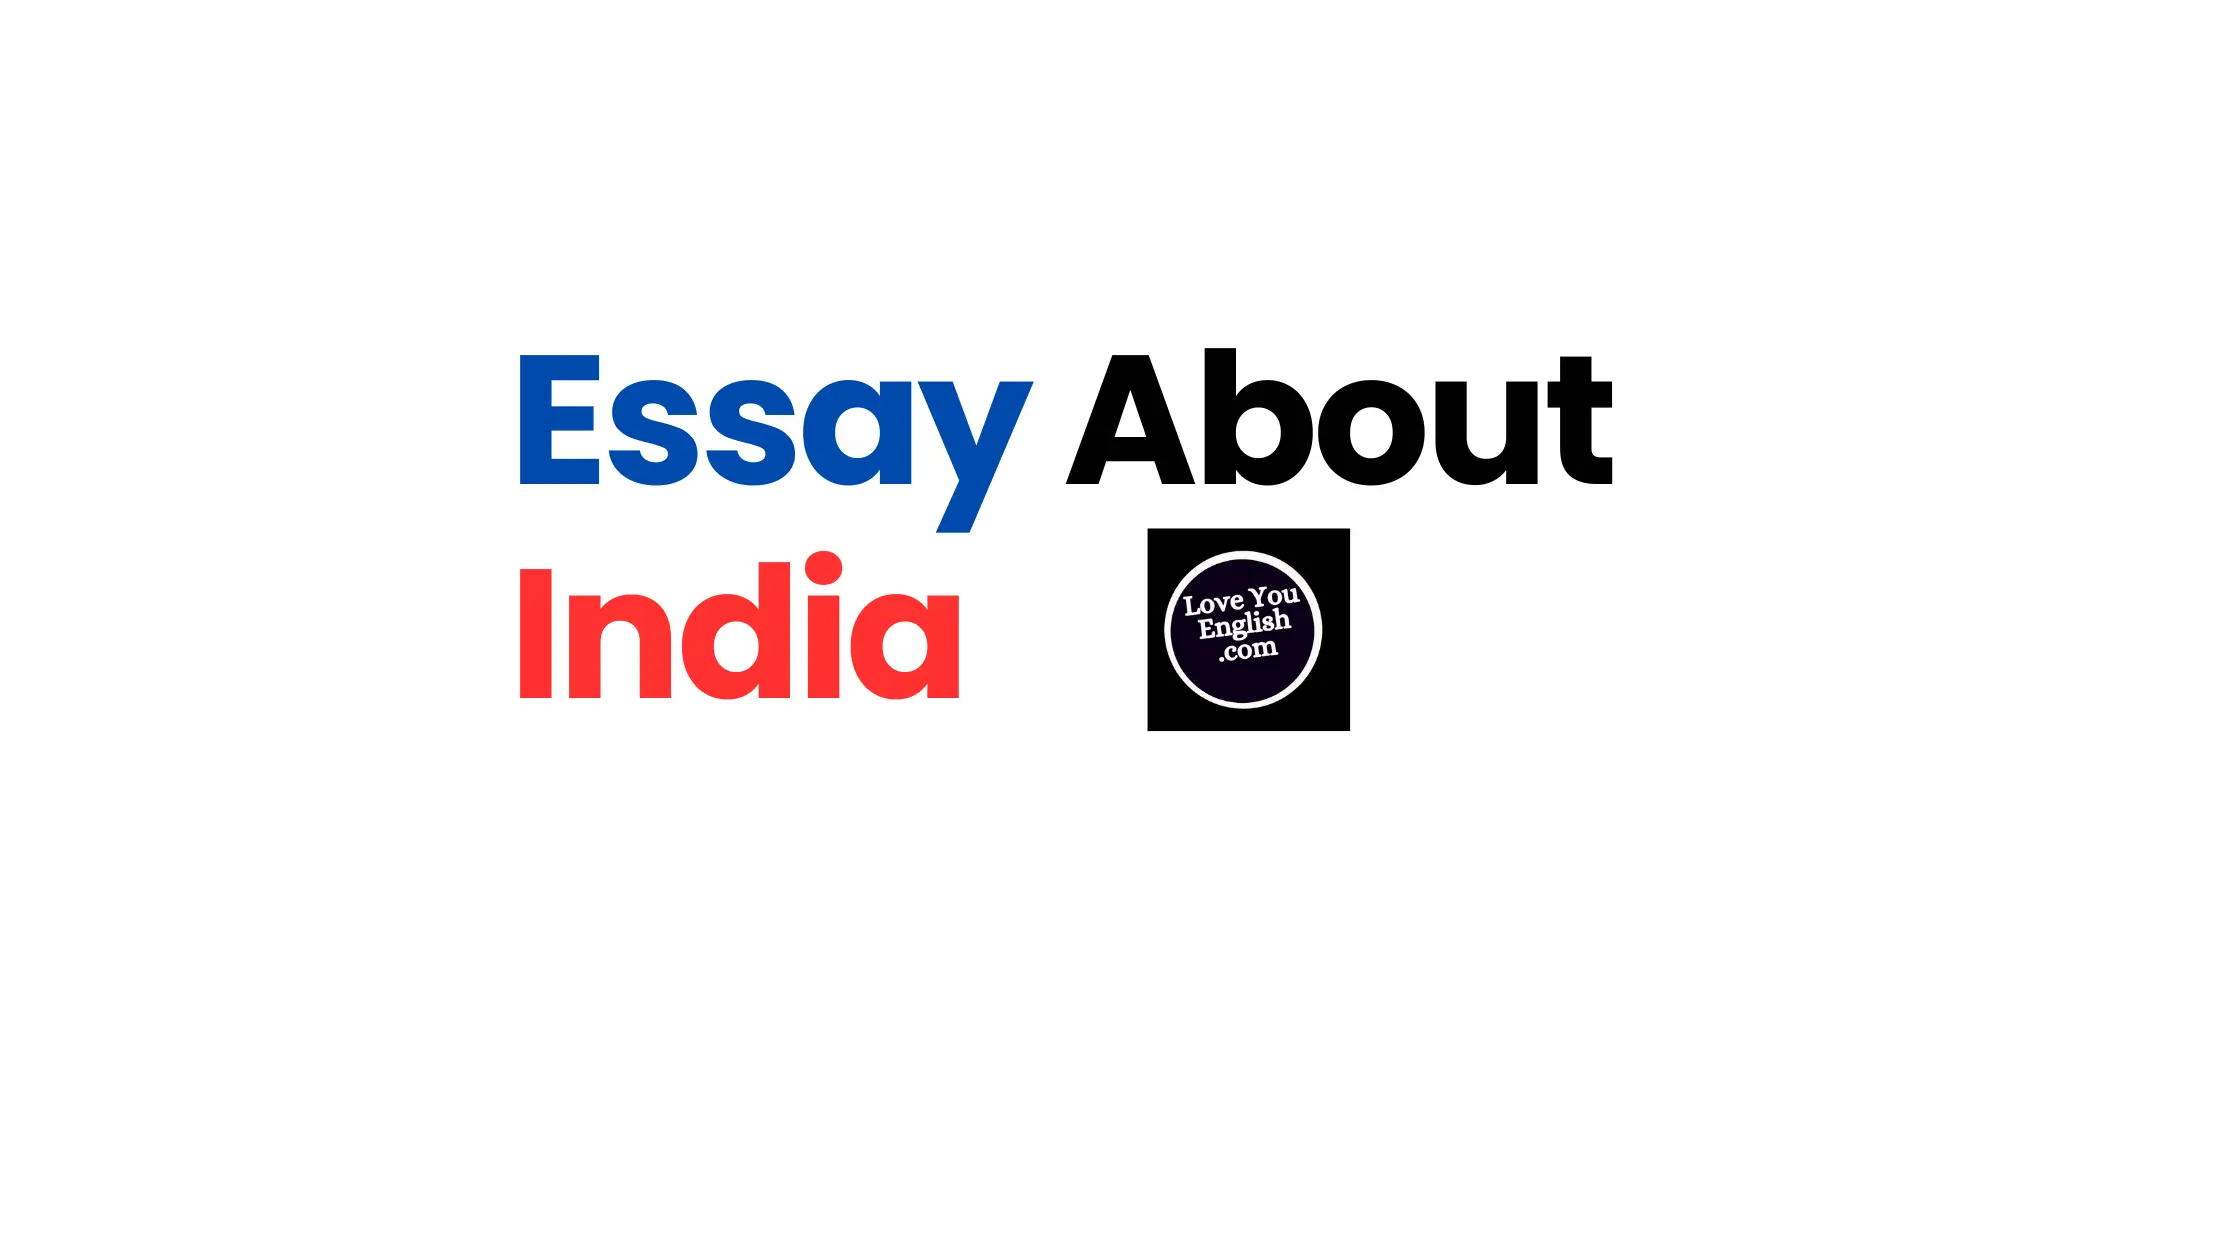 Essay about India